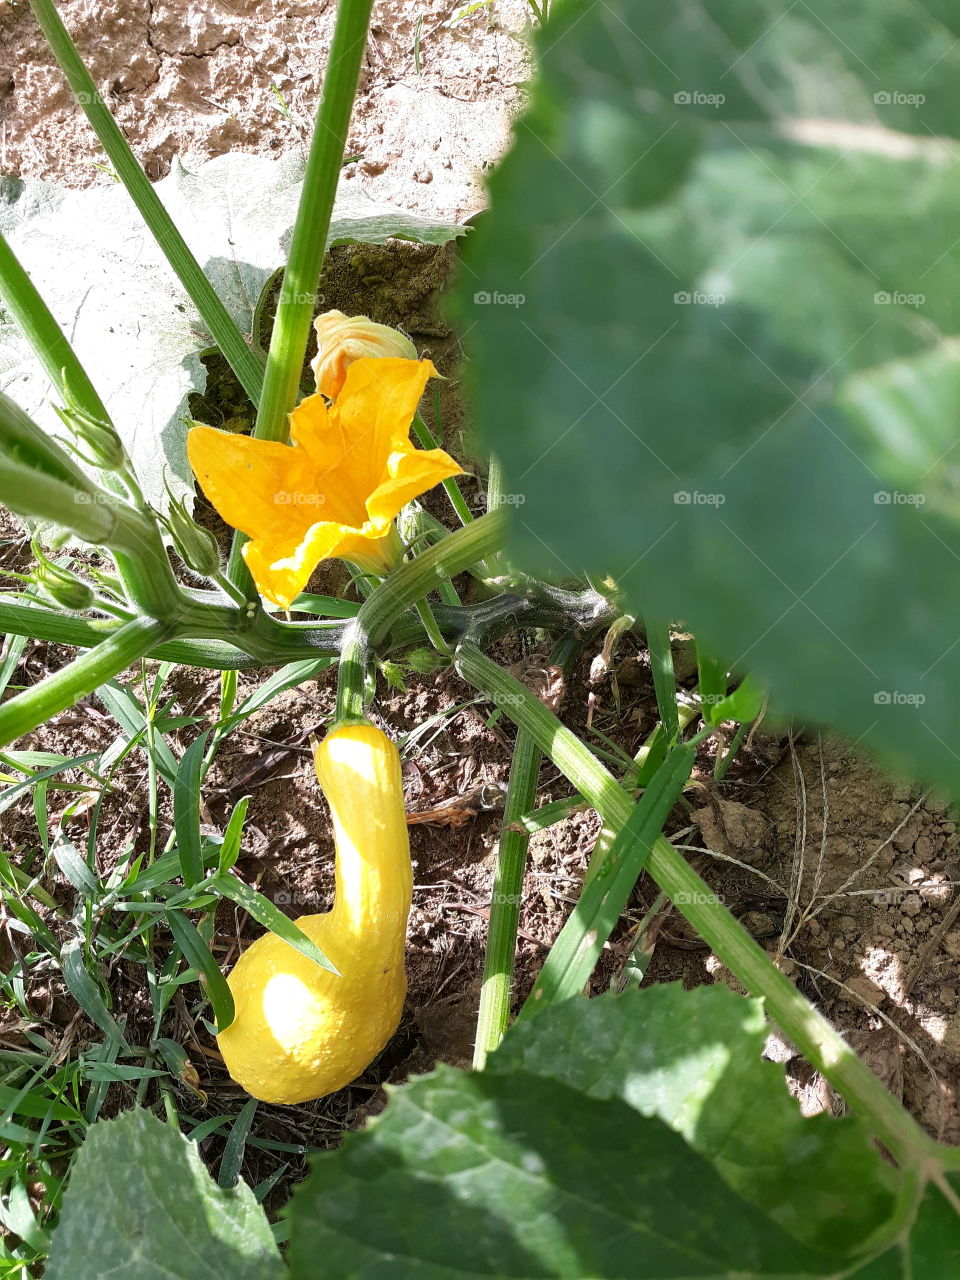 Summer squash plant with a squash ready to pick and a bloom